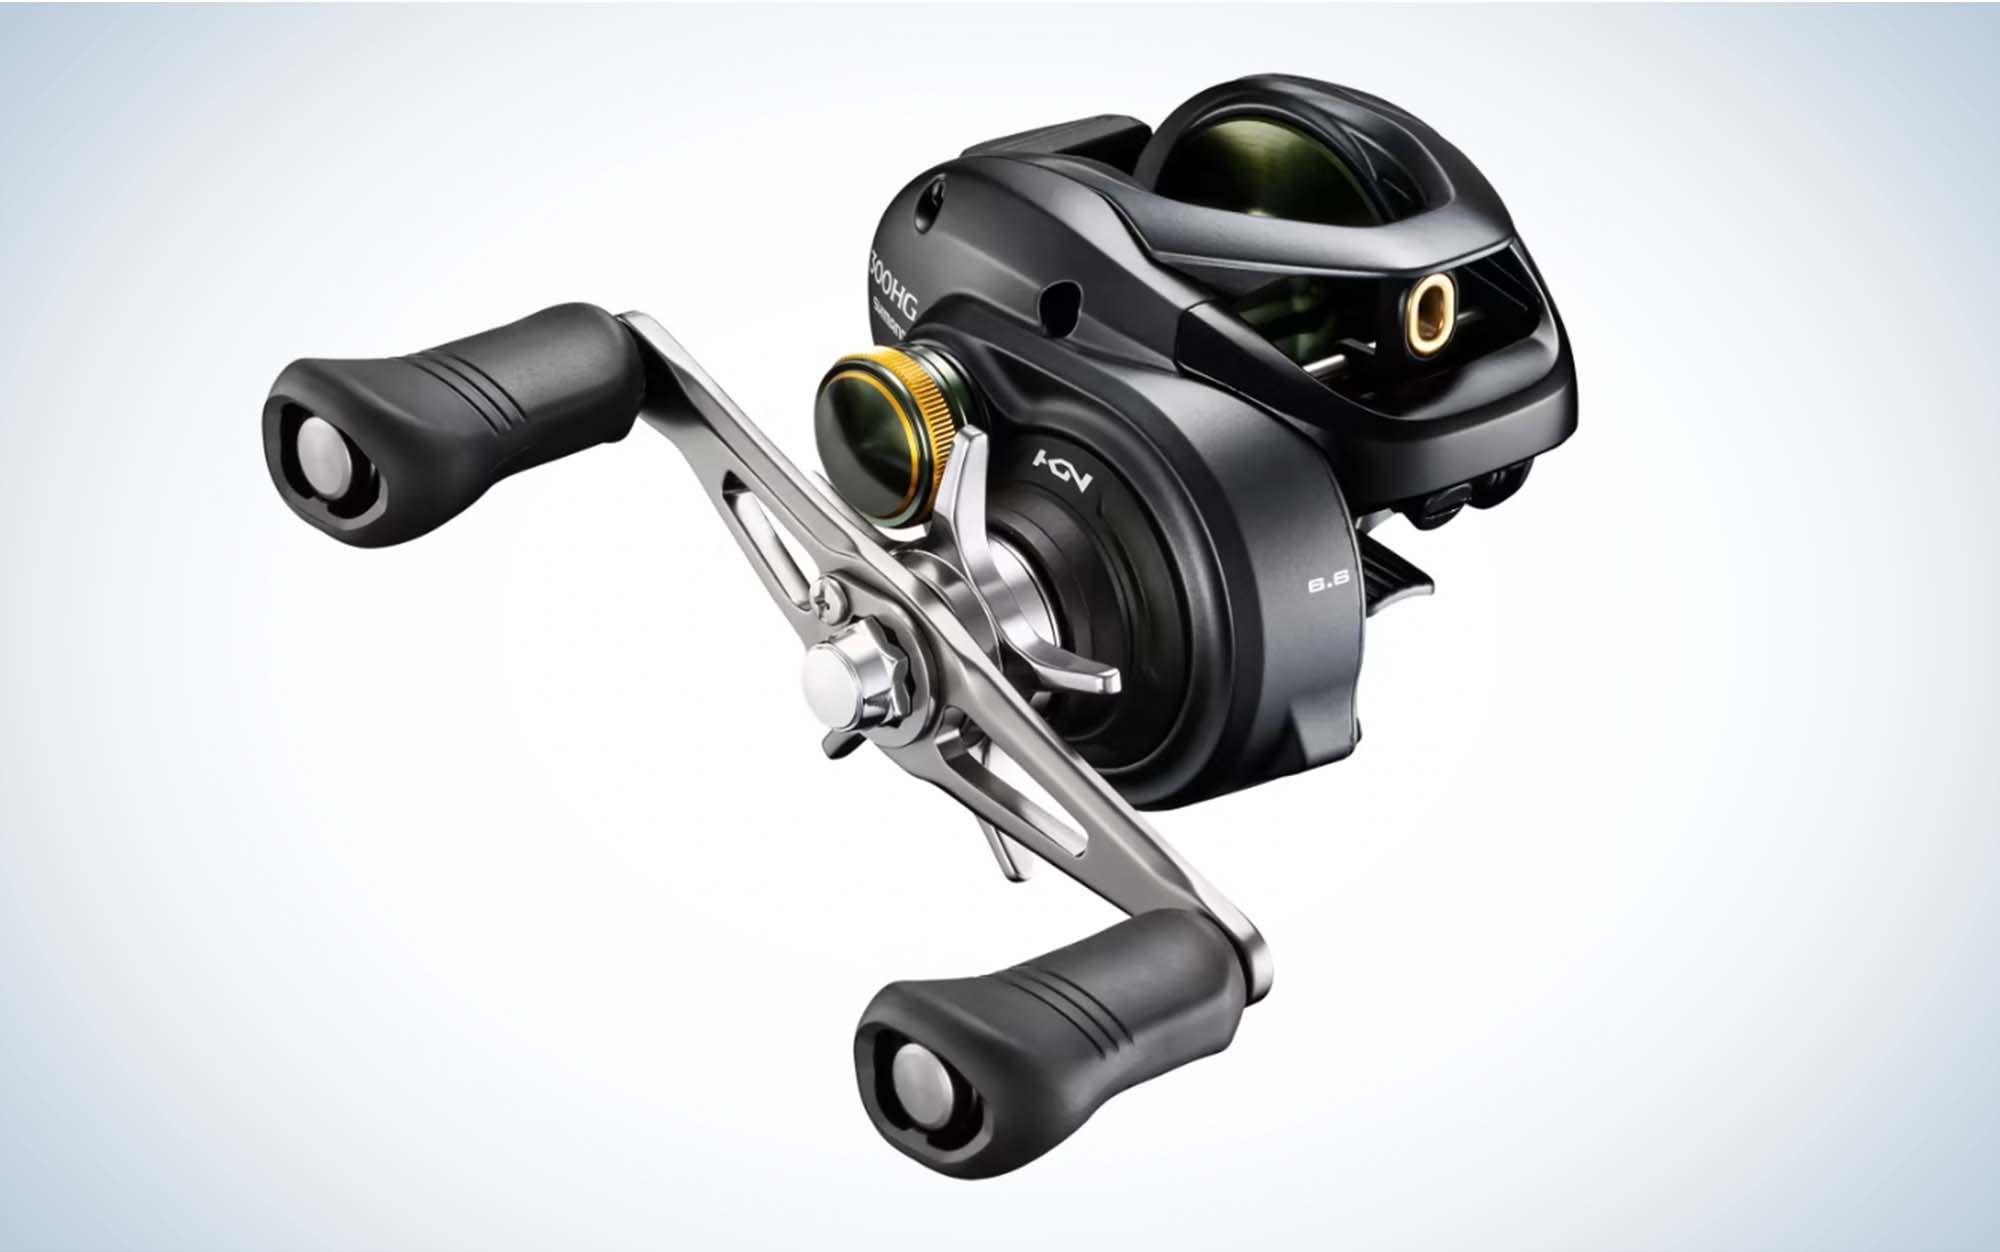 KASTKING ZEPHYR THE WORLD'S MOST WANTED BFS REEL